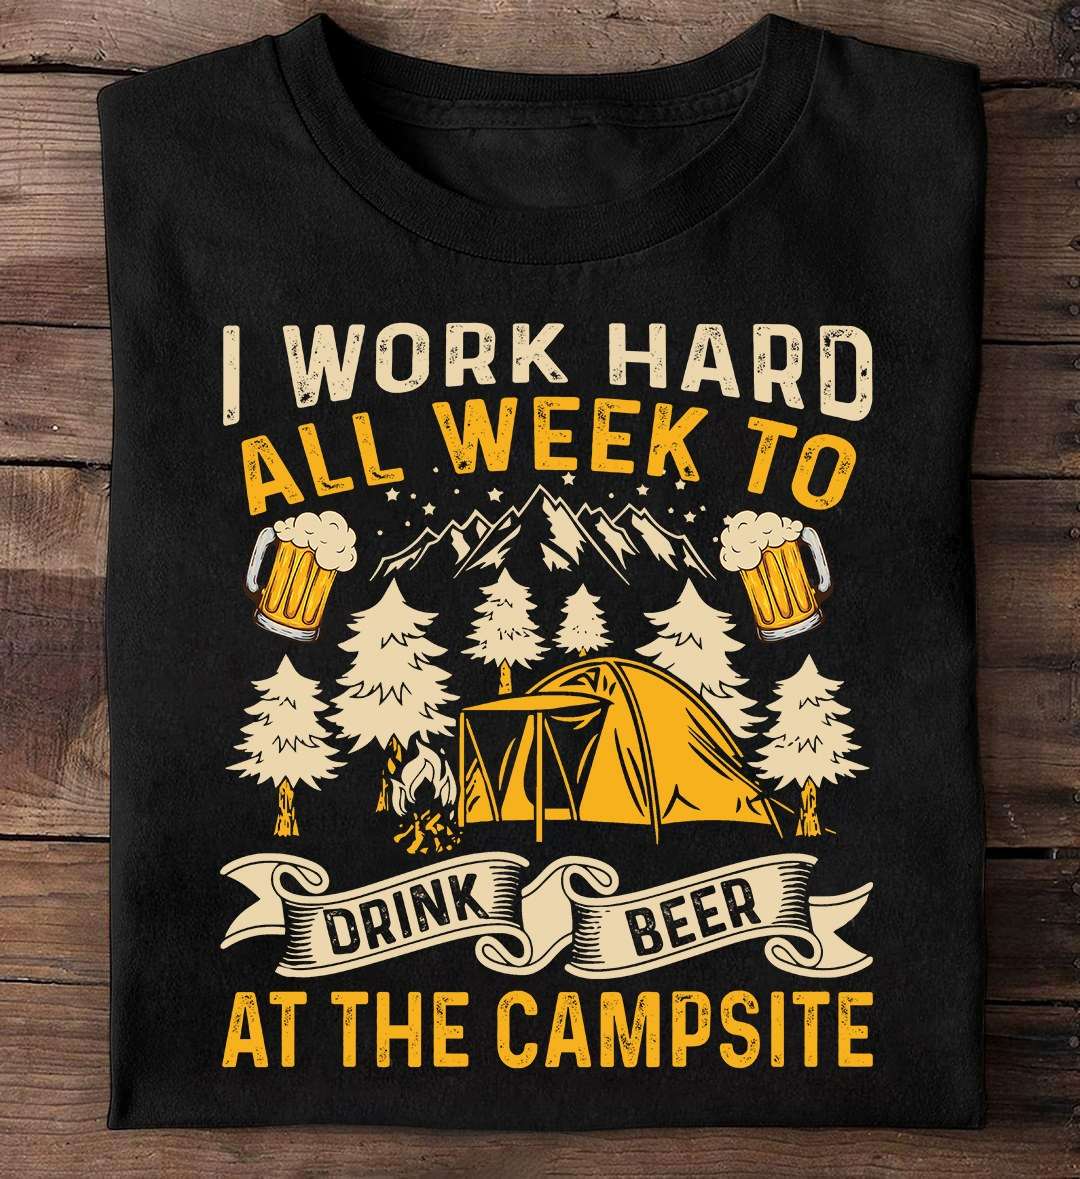 I work hard all week to drink beer at the campsite - Camping on the mountain, drinking and camping